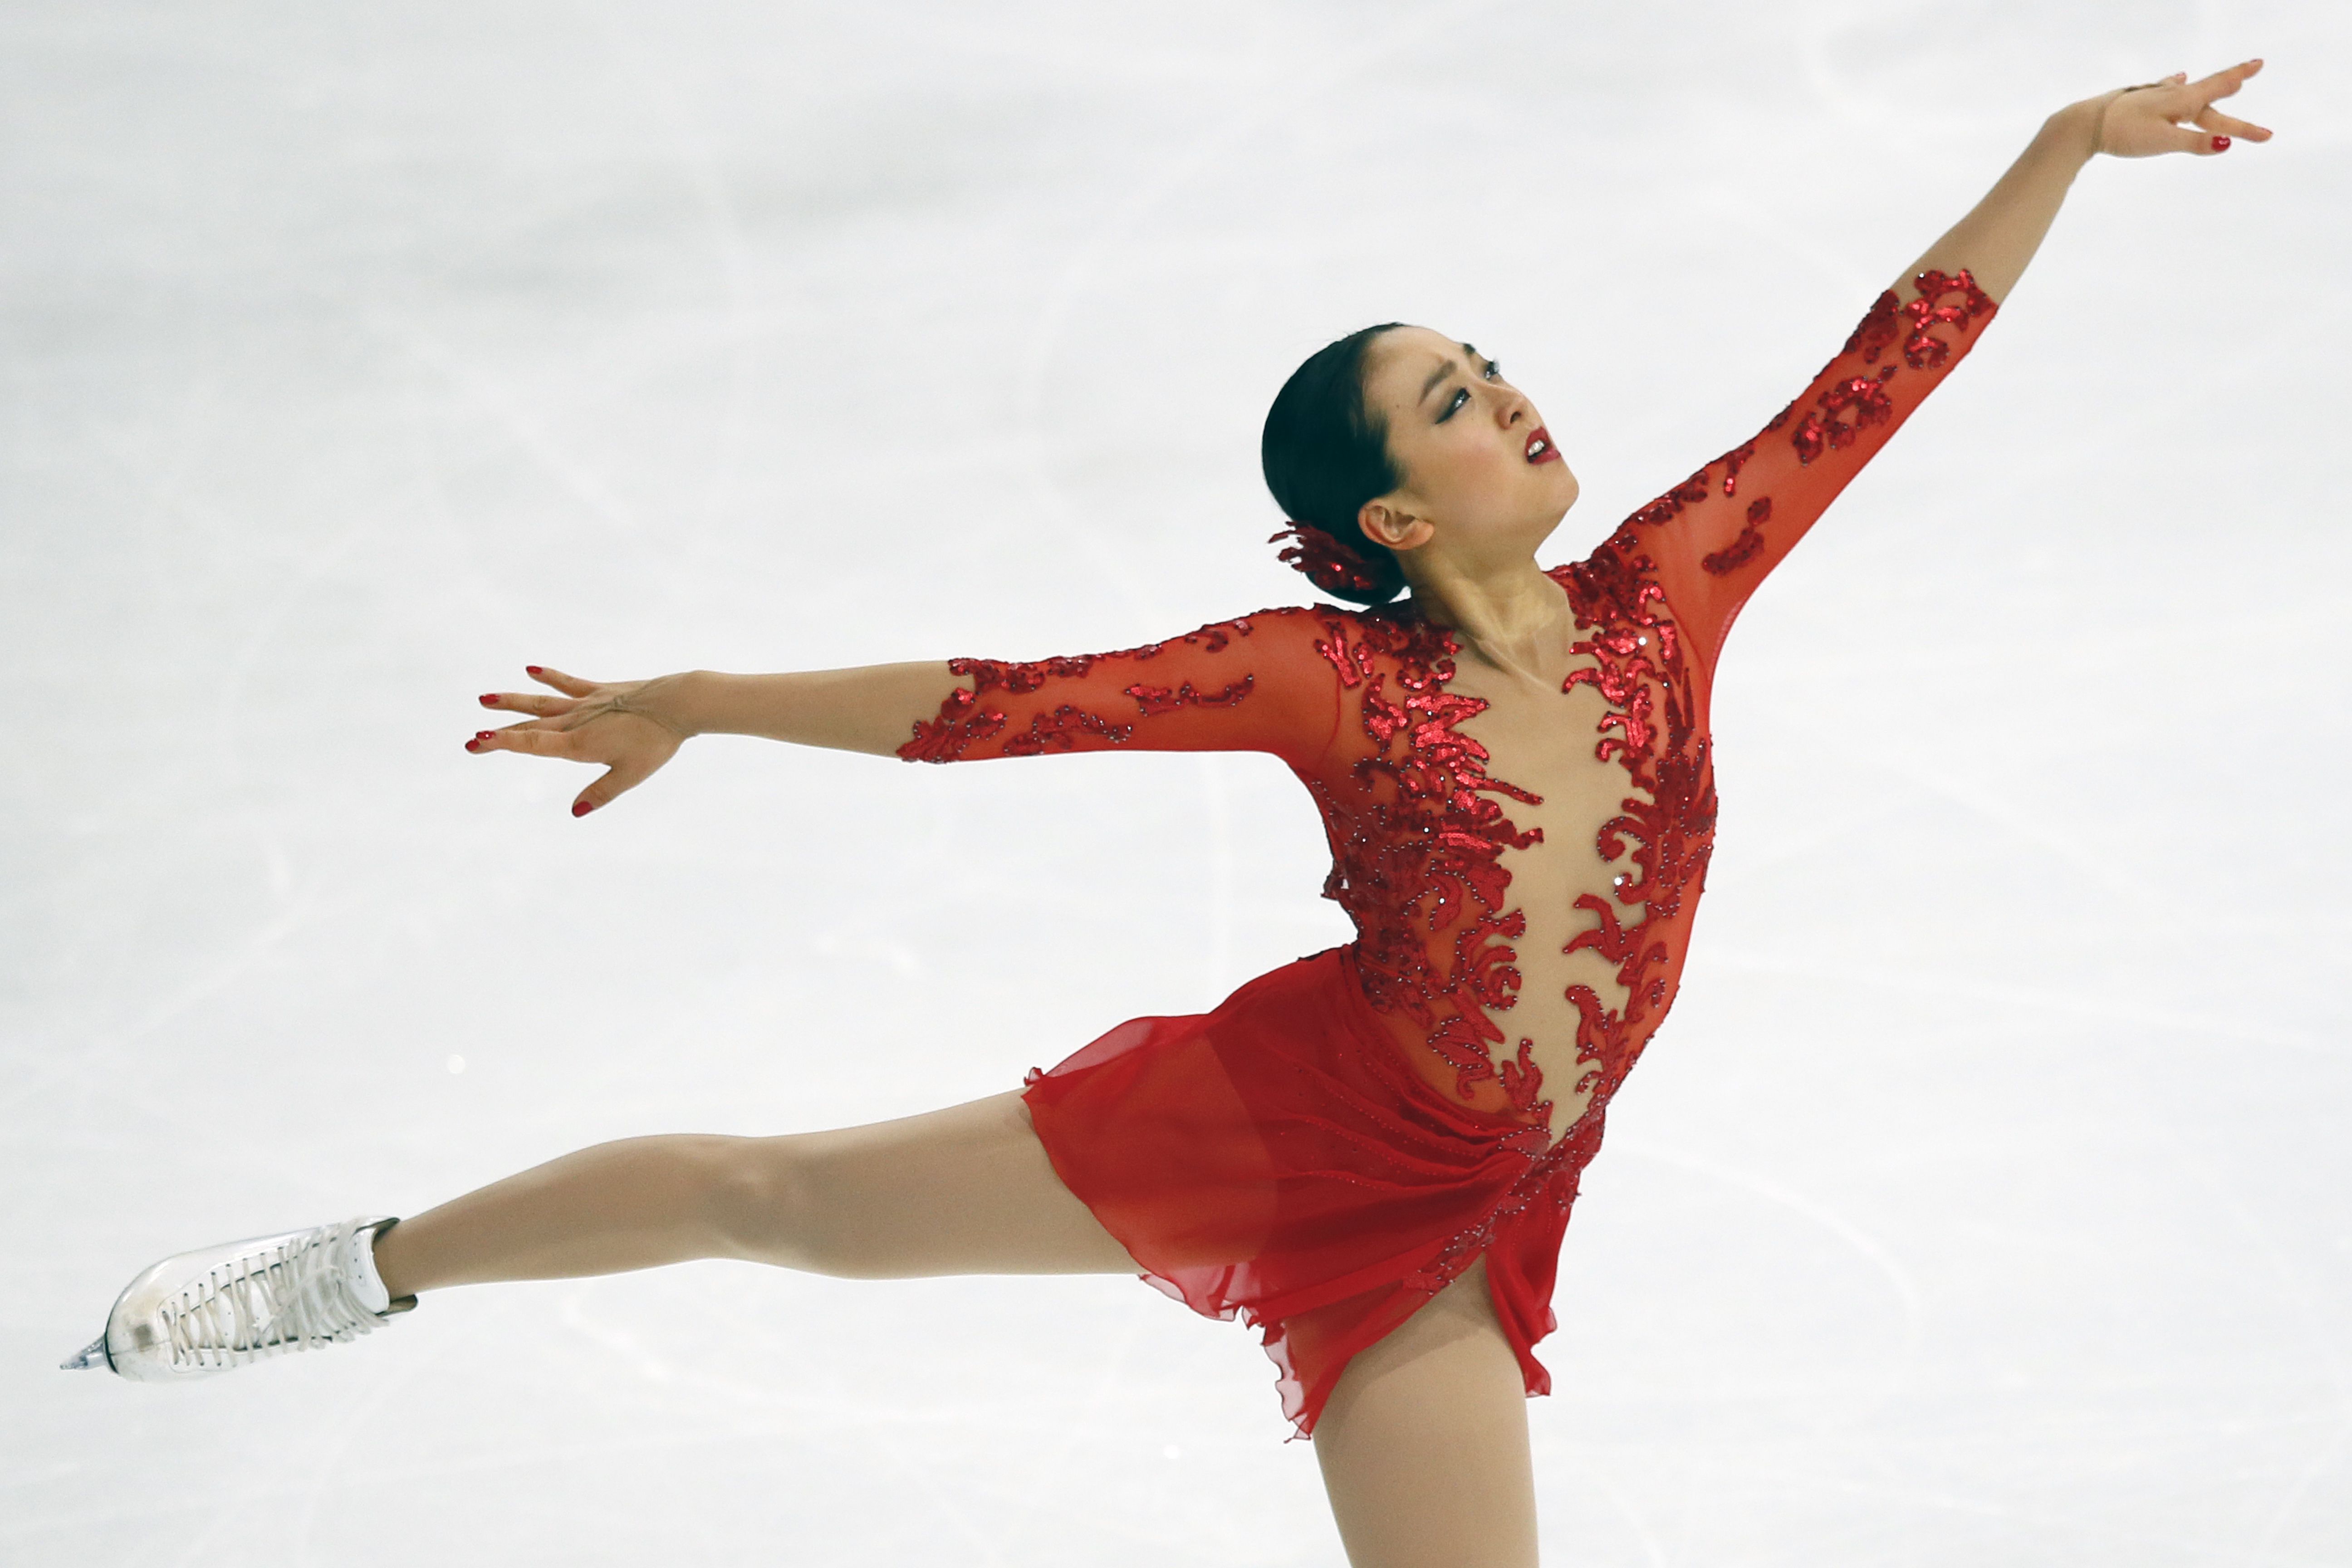 Disappointing end to Israeli skater's run in Sochi